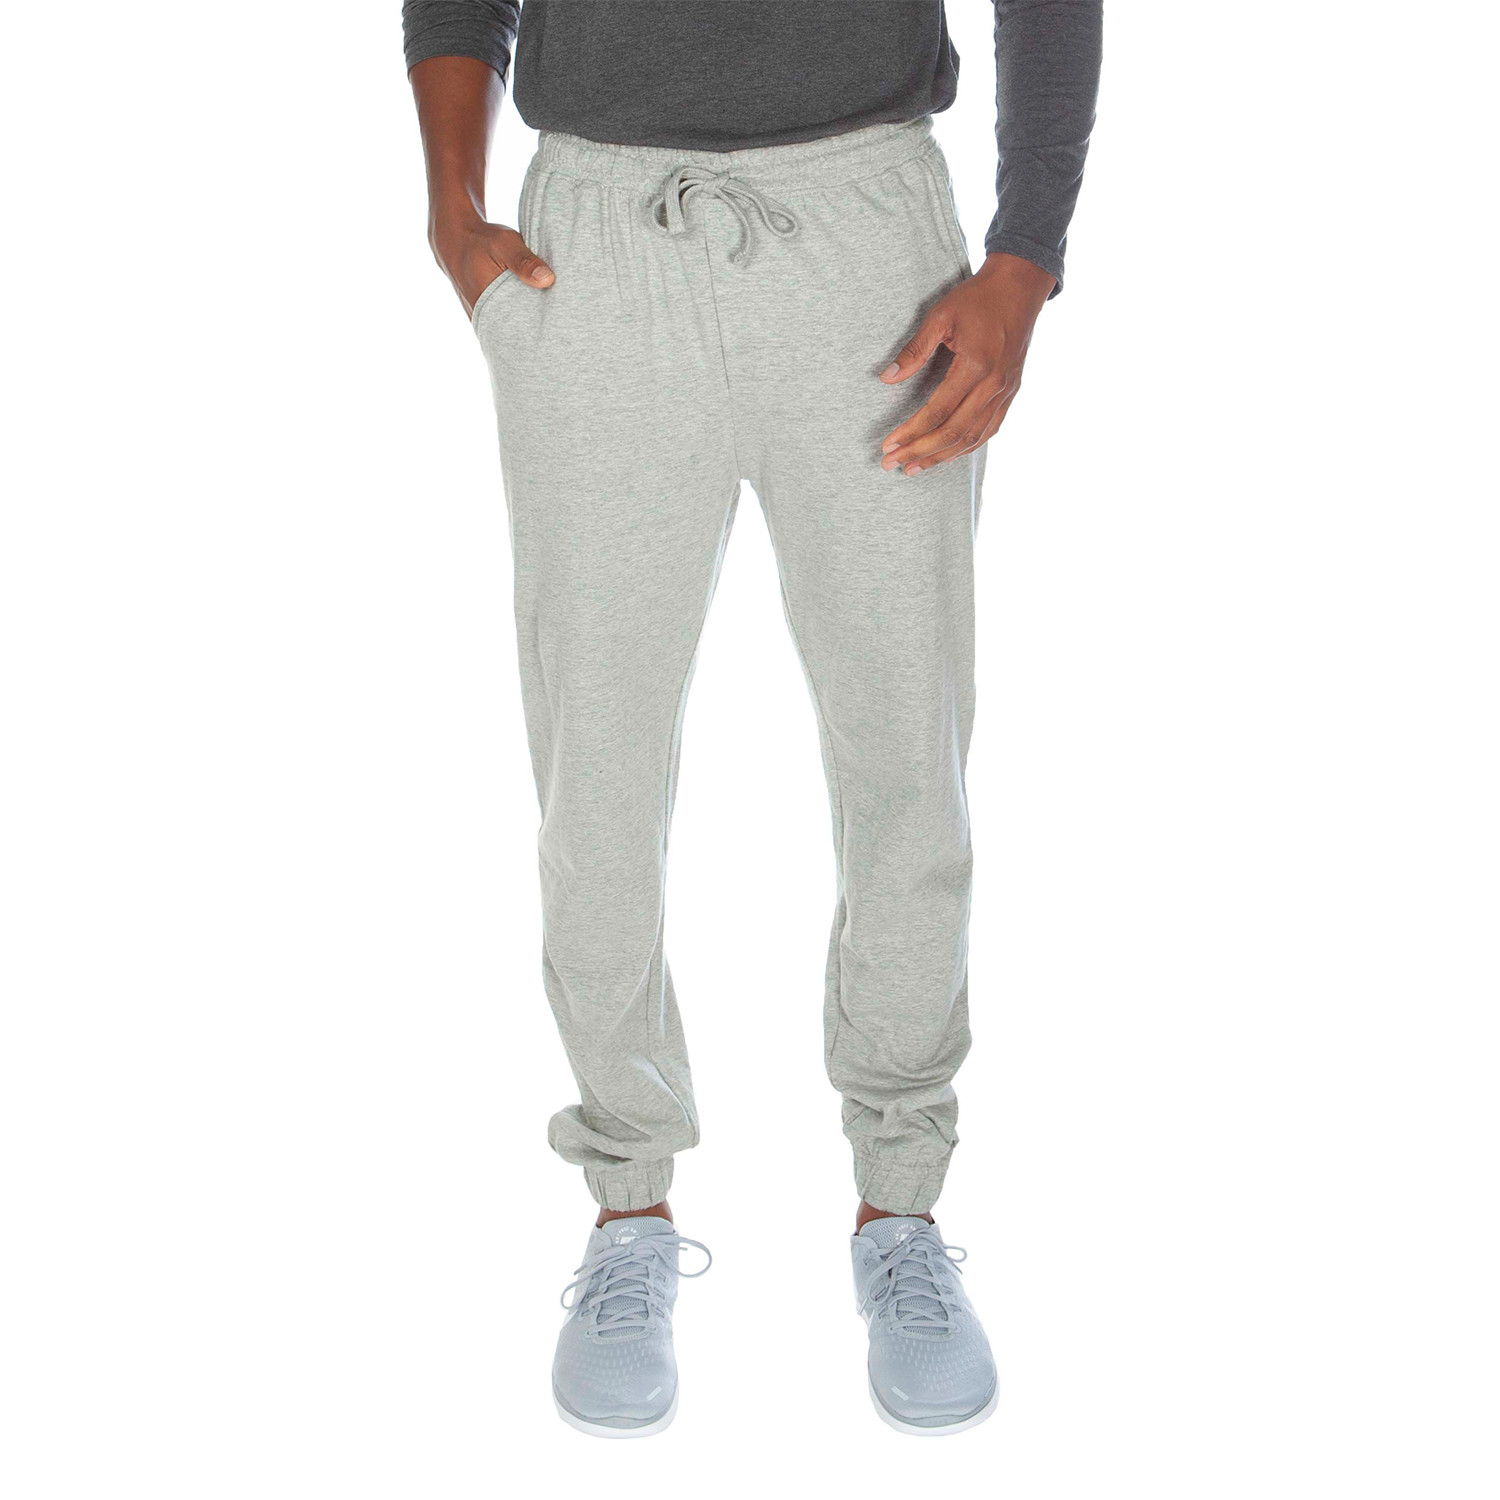 Super Soft Loose Knit Jogger // Light Gray Heather (L) - Unsimply ...